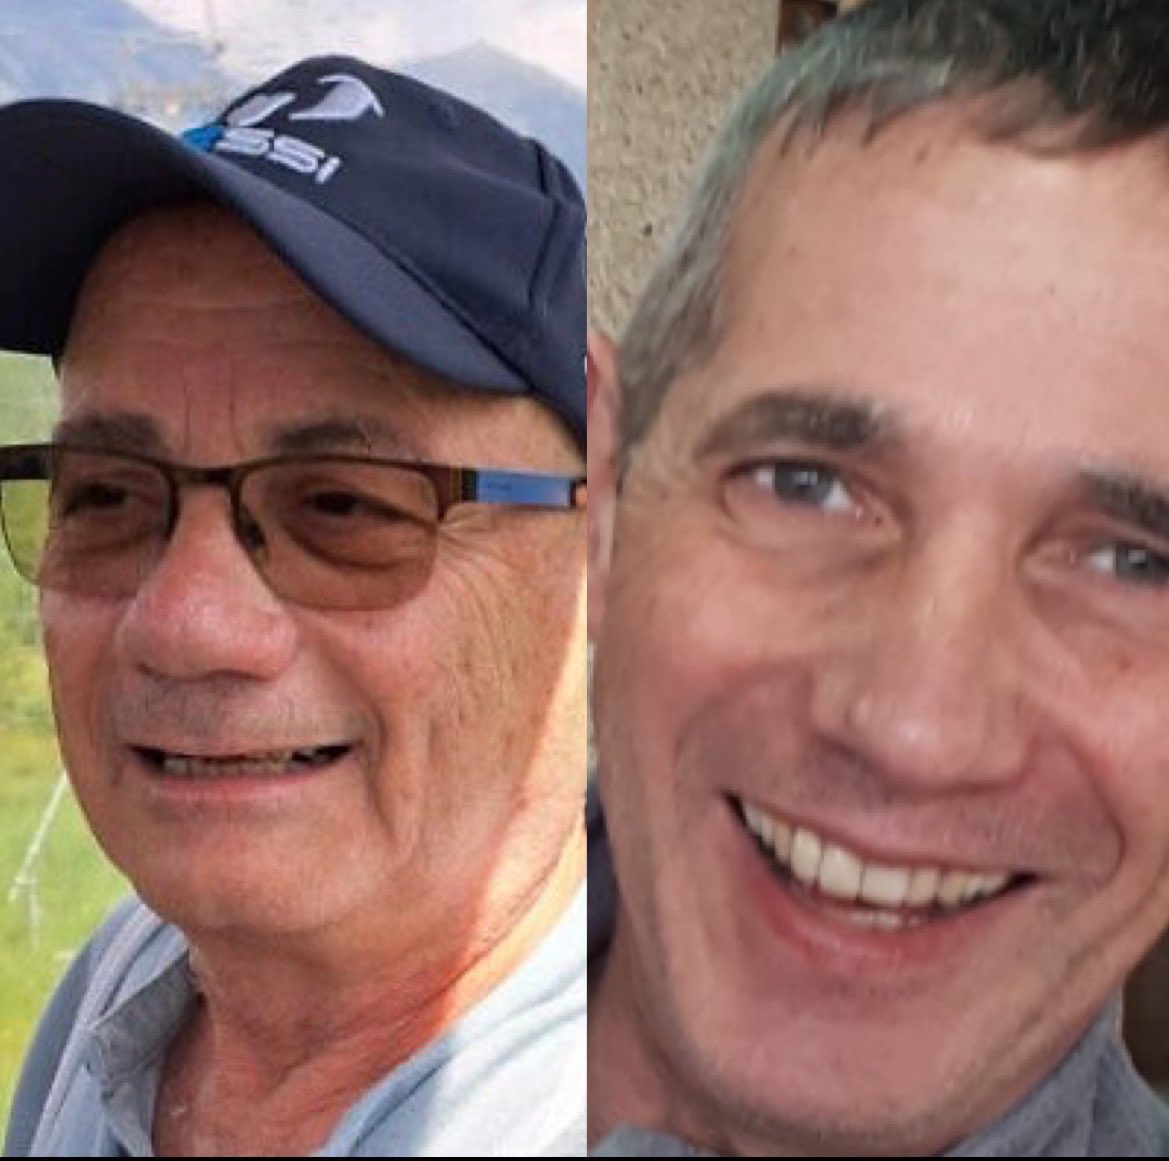 BREAKING: 2 Israeli hostages, Fernando Simon Marman (60) and Norberto Louis Har (70), have been rescued by the IDF from Gaza. They were kidnapped by Hamas on October 7th from Kibbutz Nir Yitzhak.